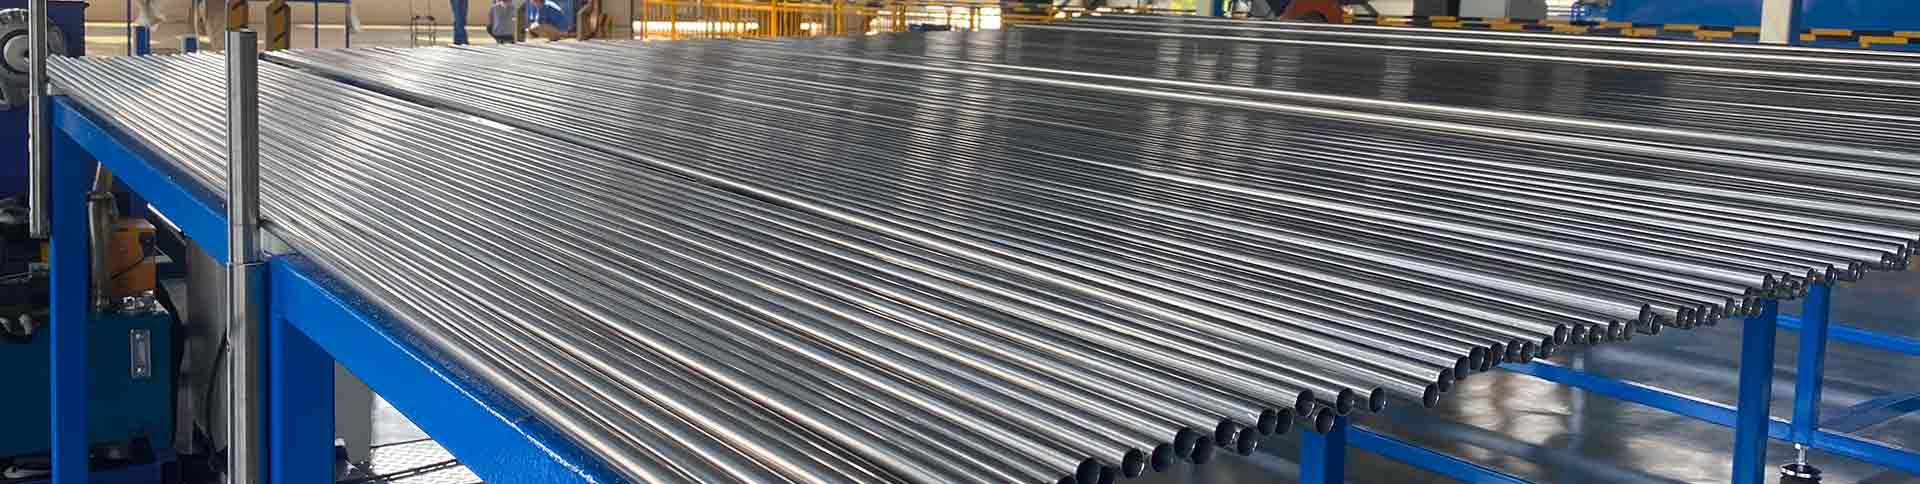 How to bend stainless steel tubing?